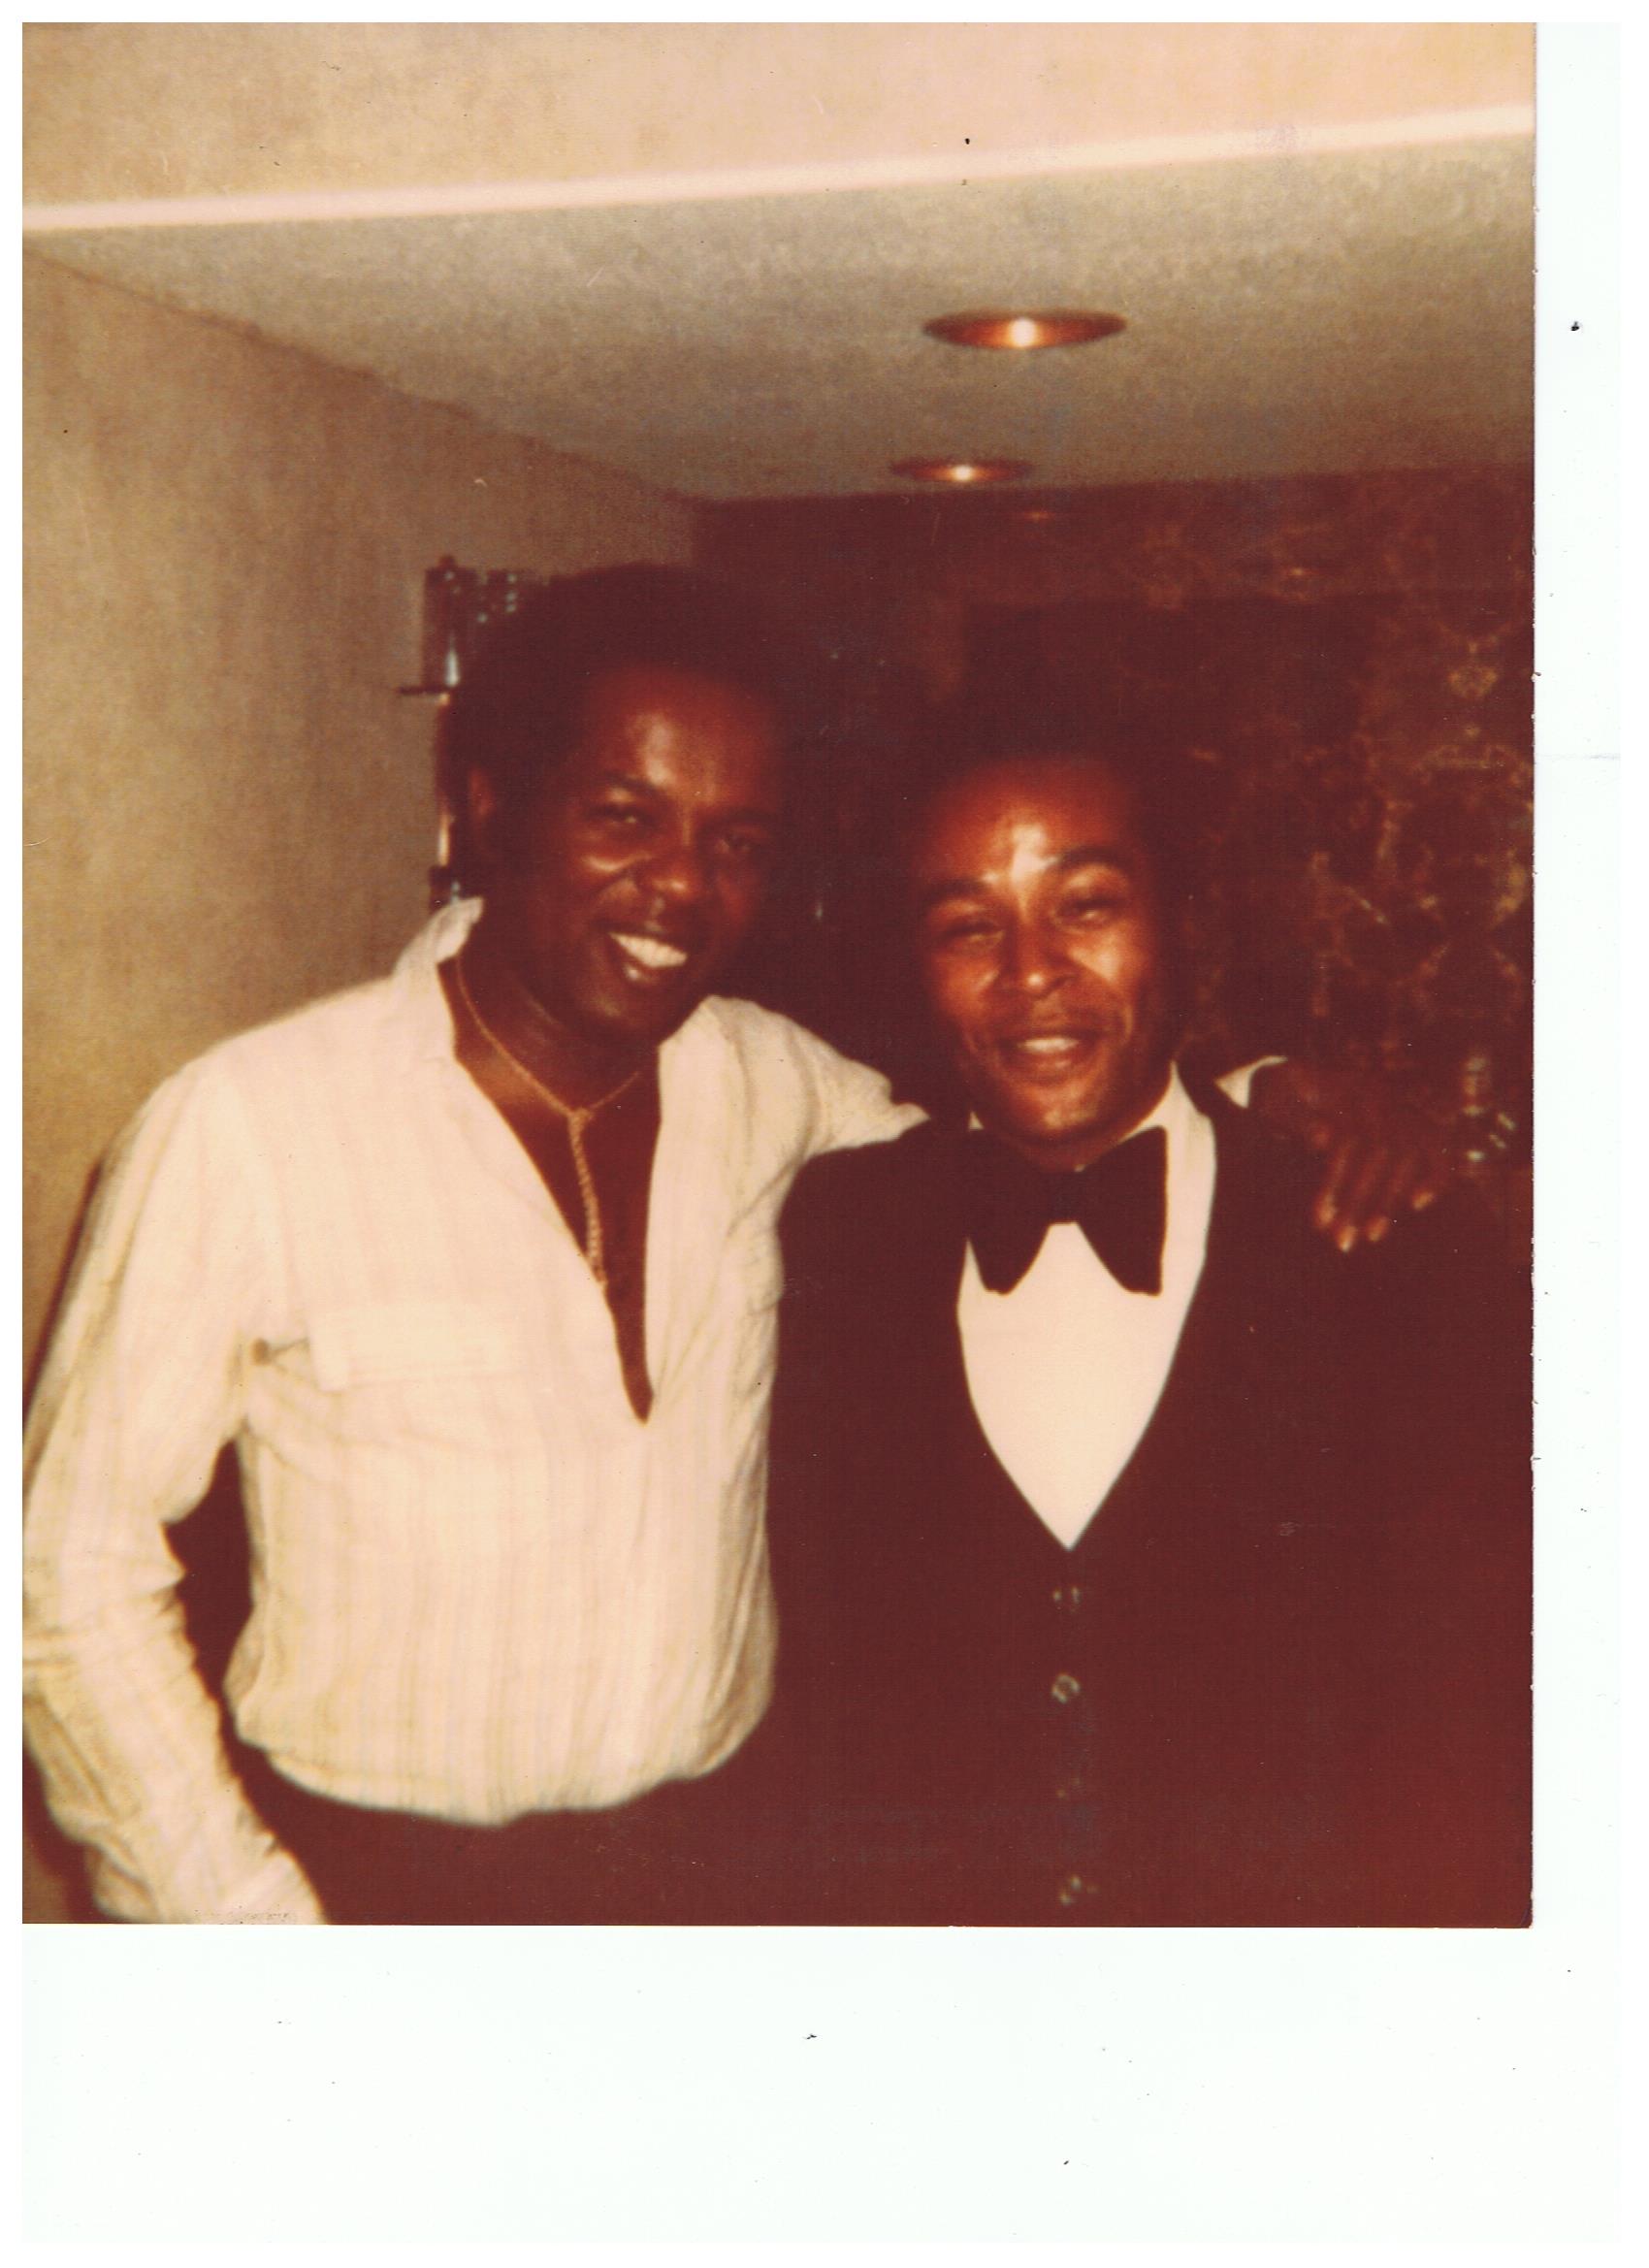 Michael Dwight Smith in Las Vegas with Lou Rawls.